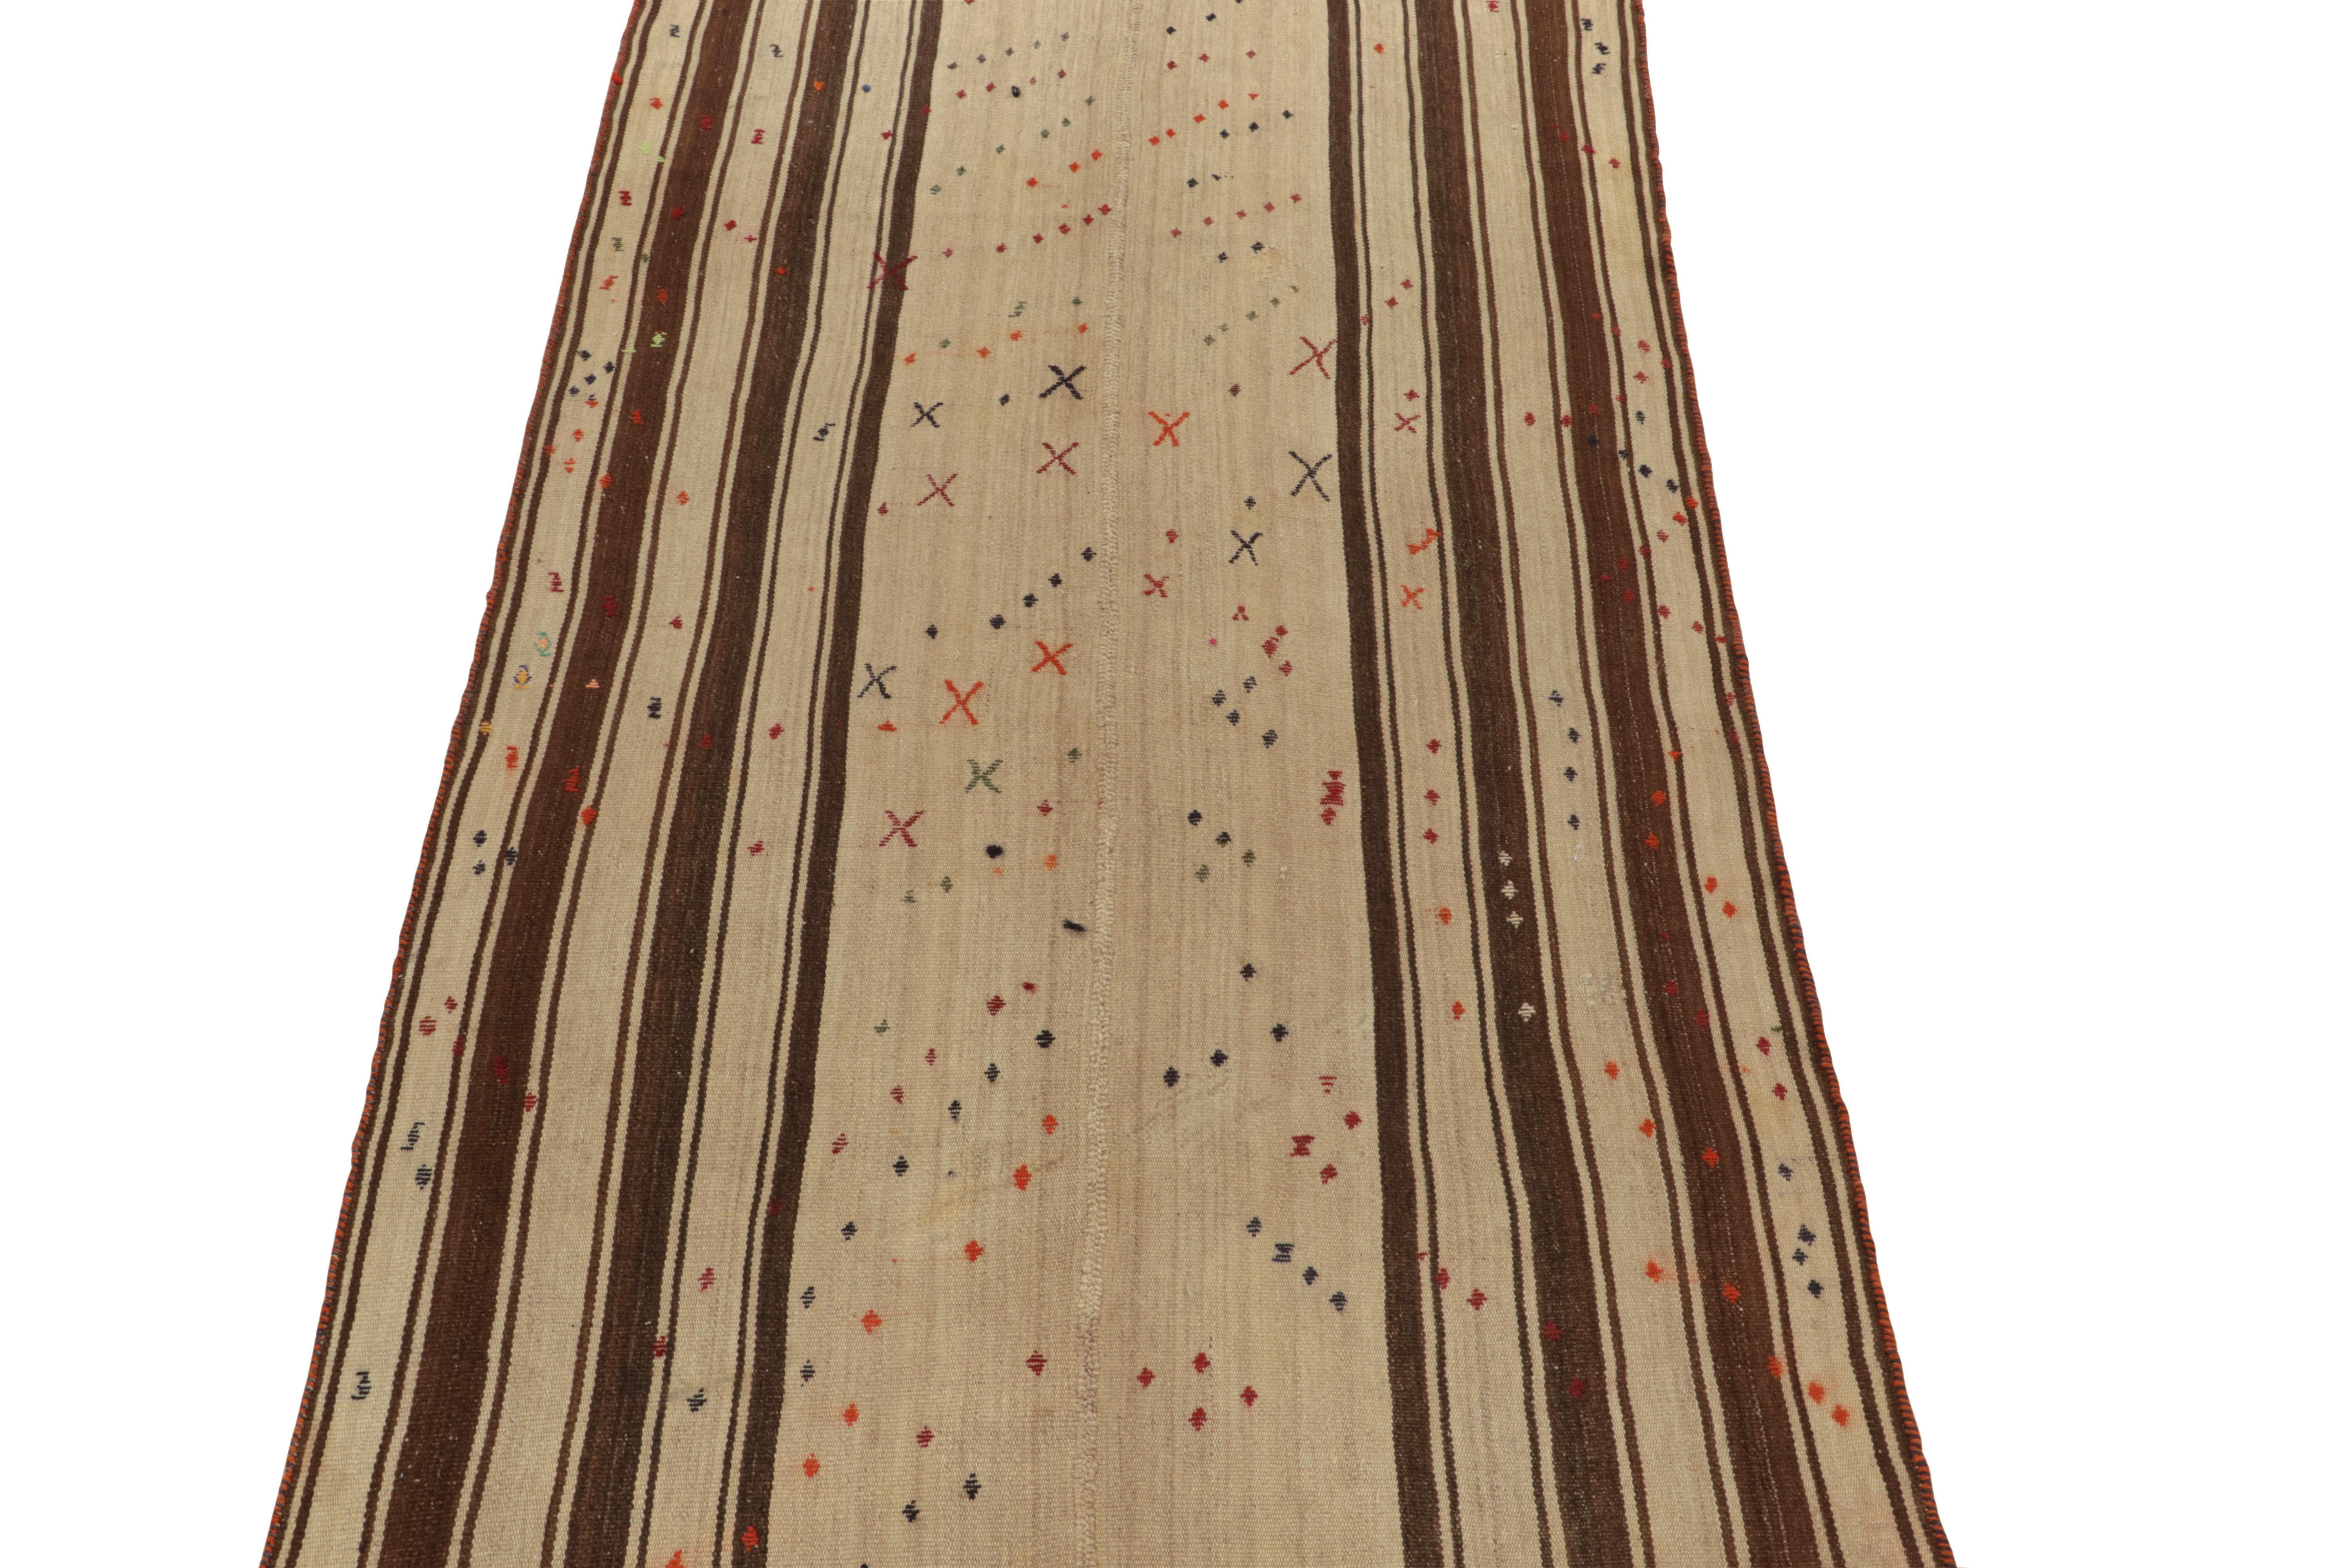 Originating from Turkey circa 1950-1960, a 5x10 mid-century kilim rug now entering our antique & vintage flat weaves curations. Between beige-brown stripes in vertical borders, the rug field enjoys colorful geometric patterns for a